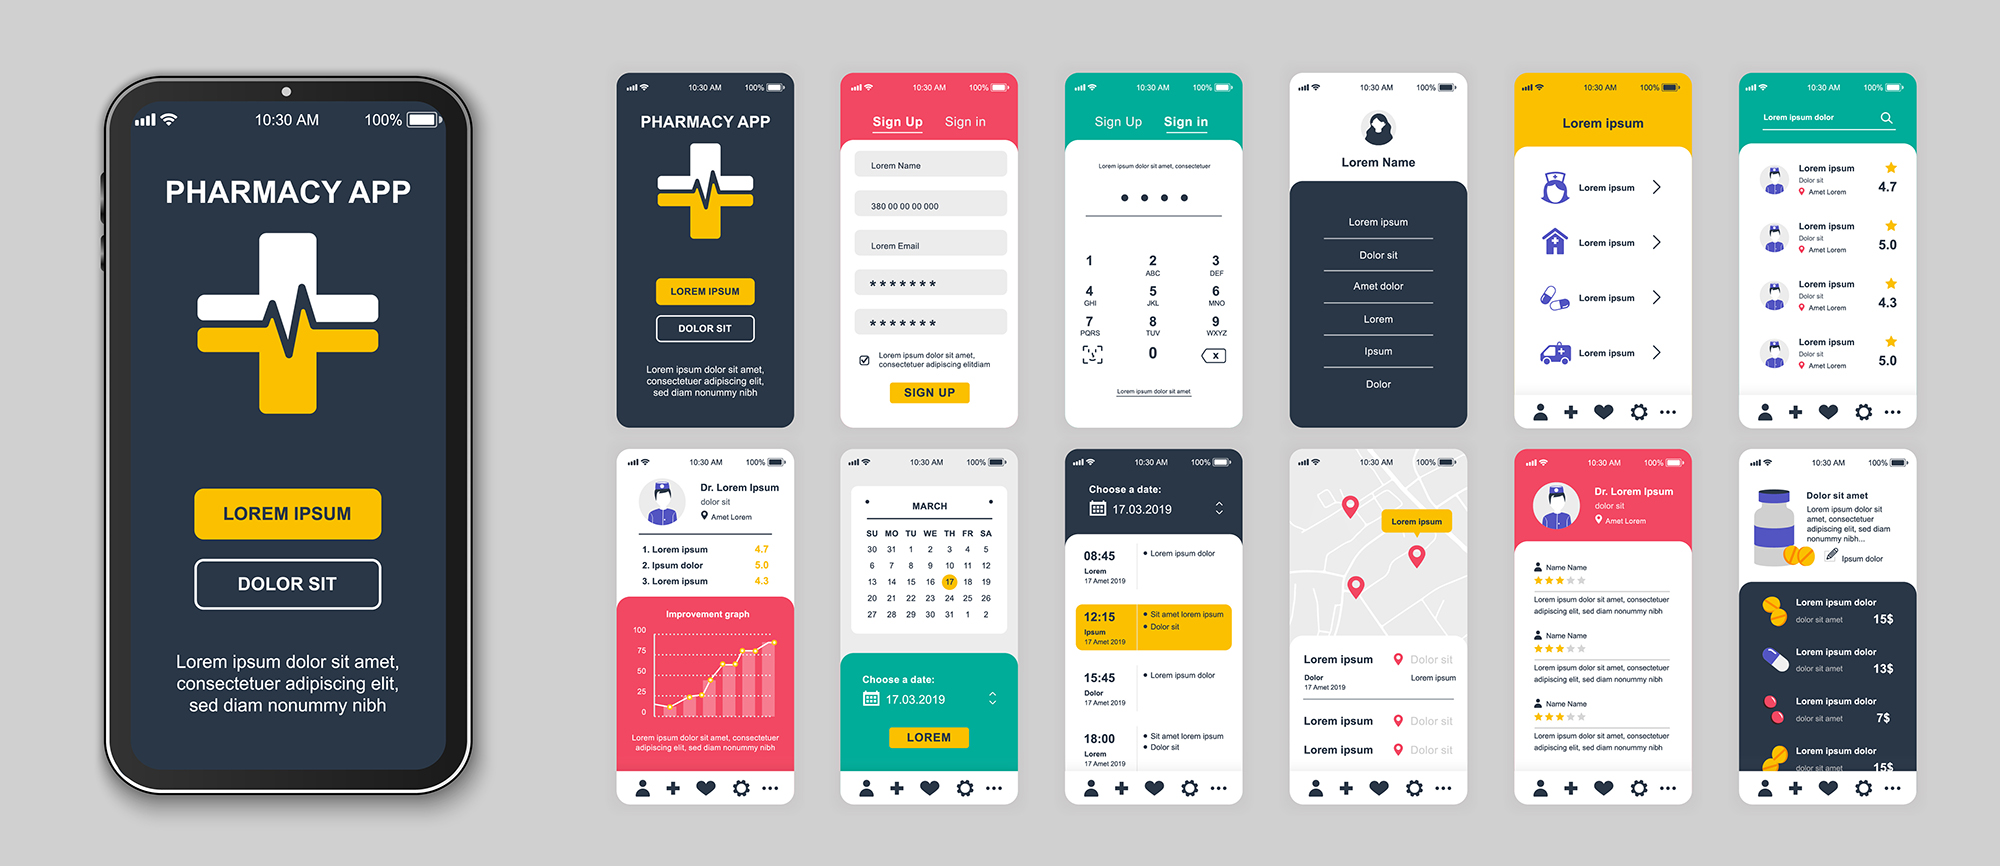 Featured image for “Why UI Design Matters for Everyone”